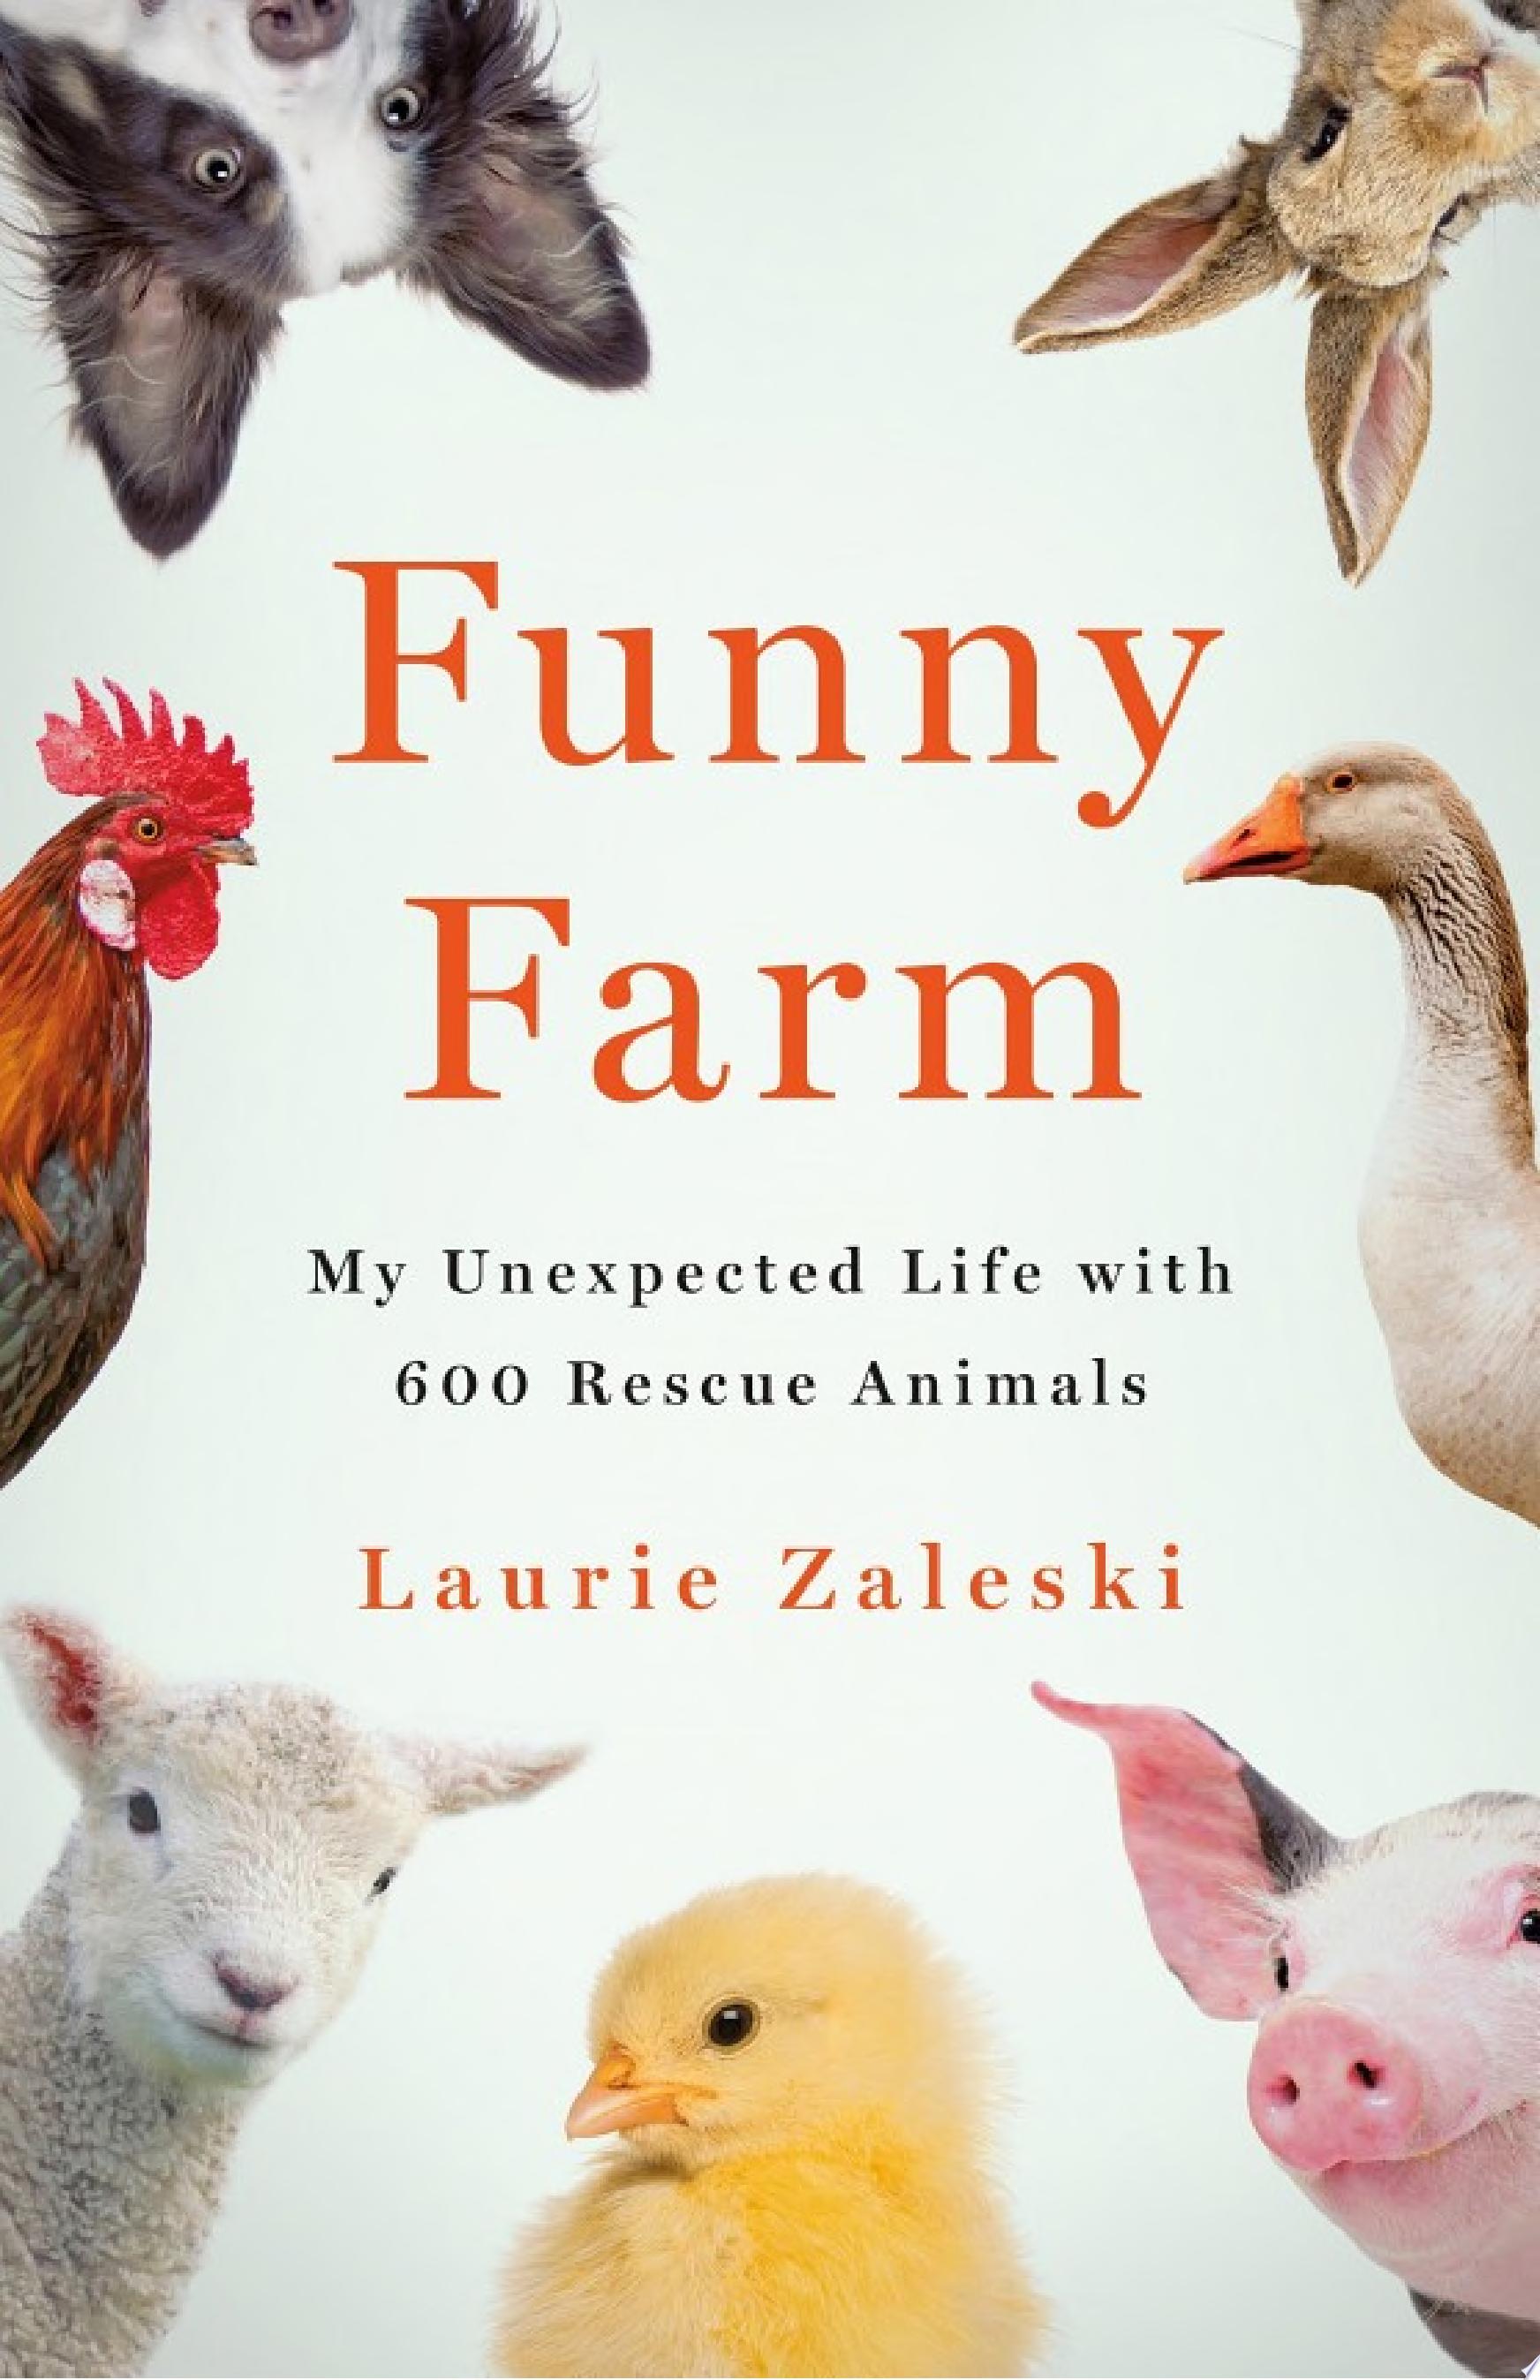 Image for "Funny Farm"